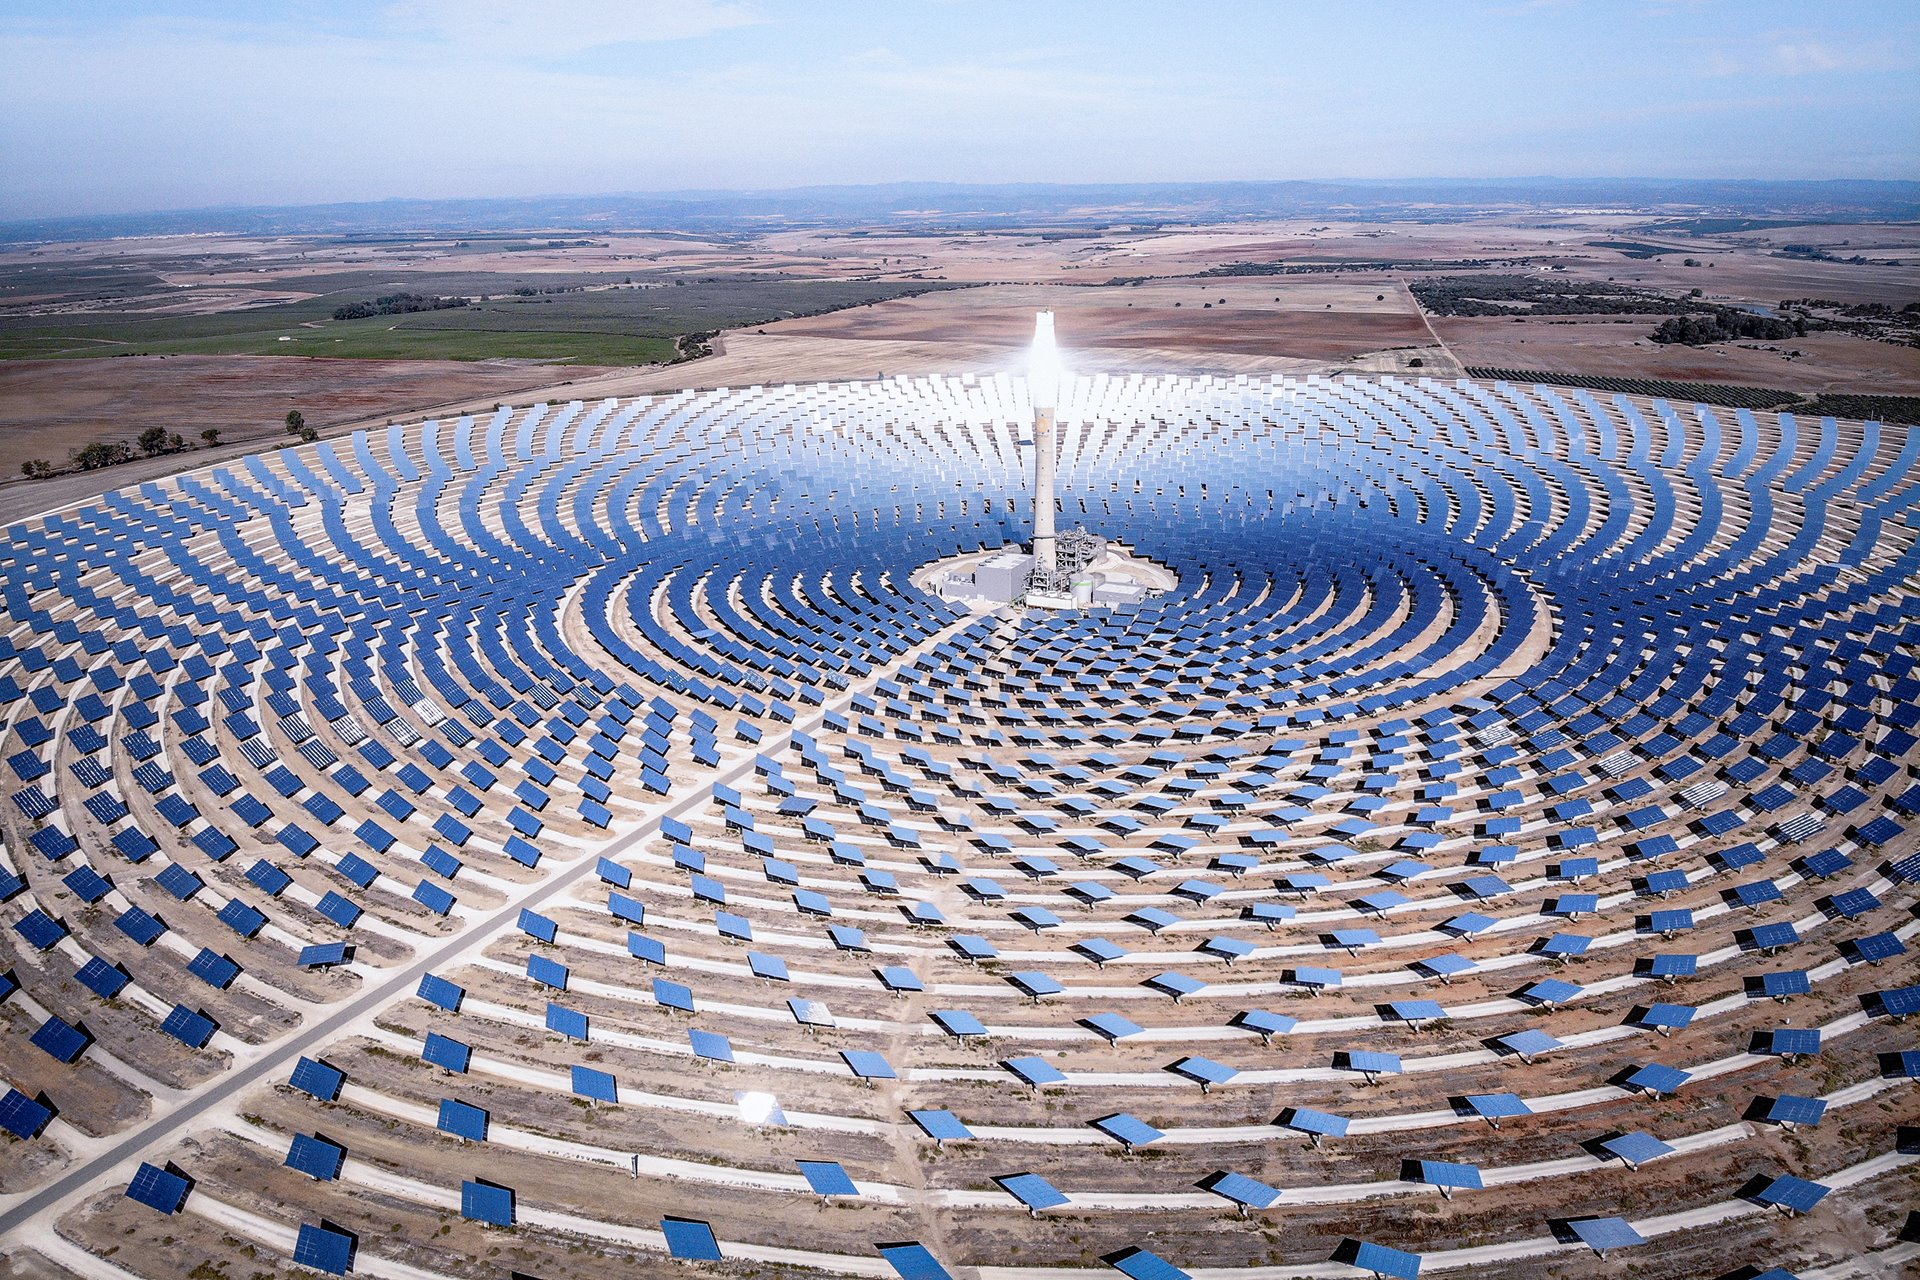 <p>This solar plant in Fuentes de Andalucía, Spain, can supply uninterrupted power, and was the first commercial plant in the world able to provide a full day of uninterrupted power supply to the grid. Instead of sunlight, it uses solar heat (which is more easily stored) to generate electricity, and can remain operational for up to 15 hours without sunlight.</p>
